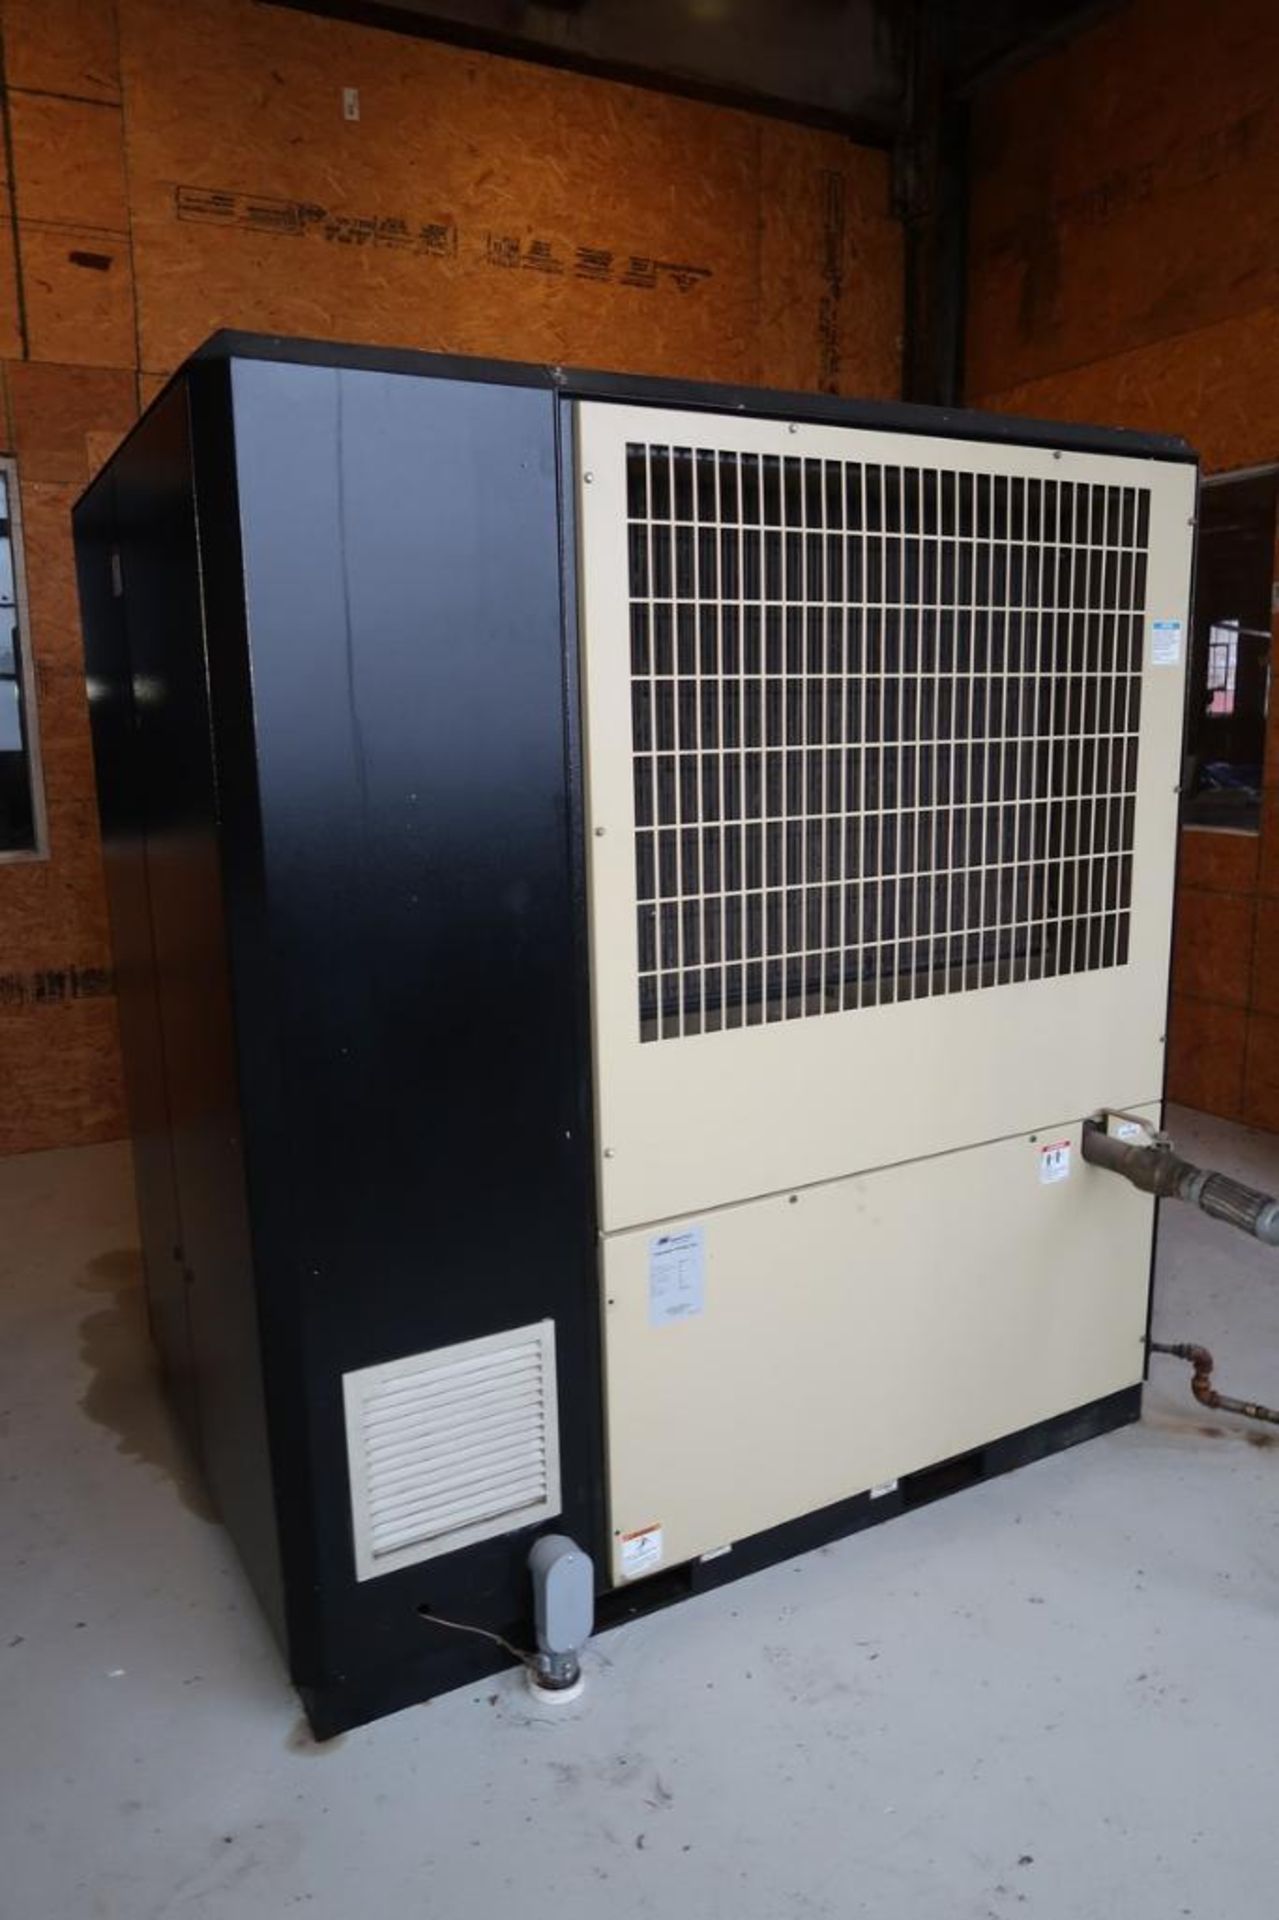 Ingersoll-Rand mdl. IRN75H-CC 75 HP Rotary Screw Compressor - Image 4 of 5